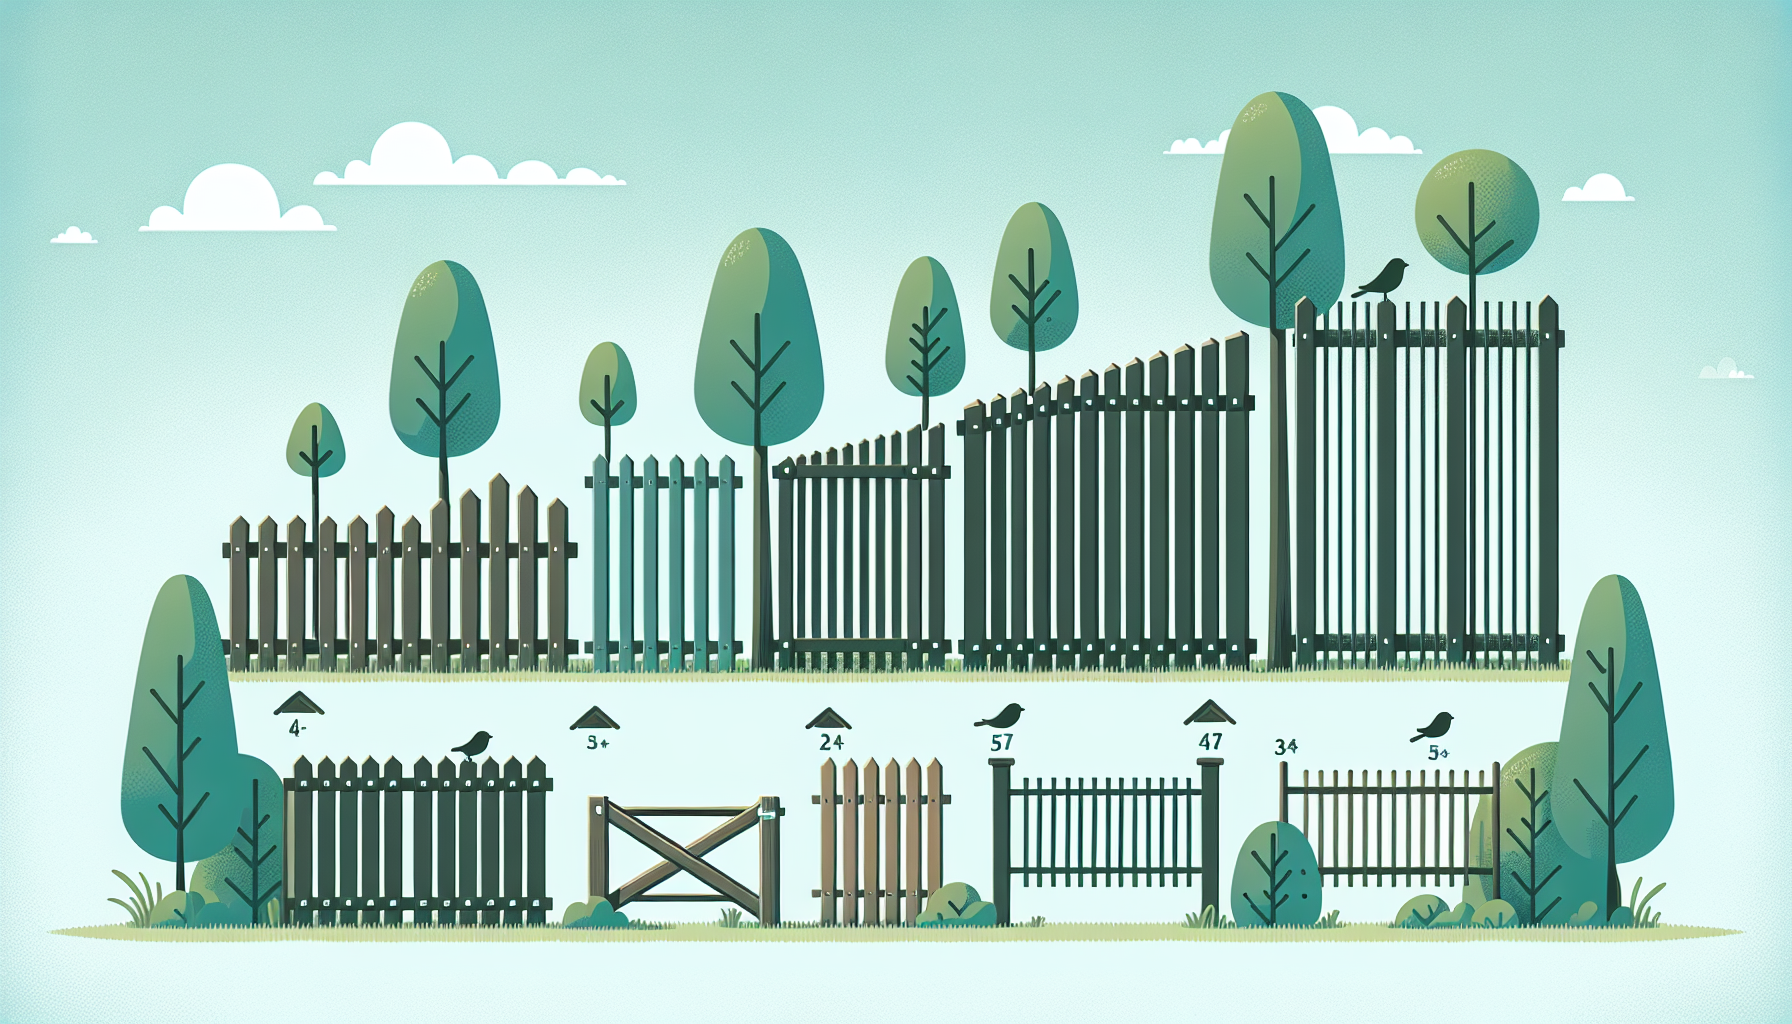 Illustration of various fence heights